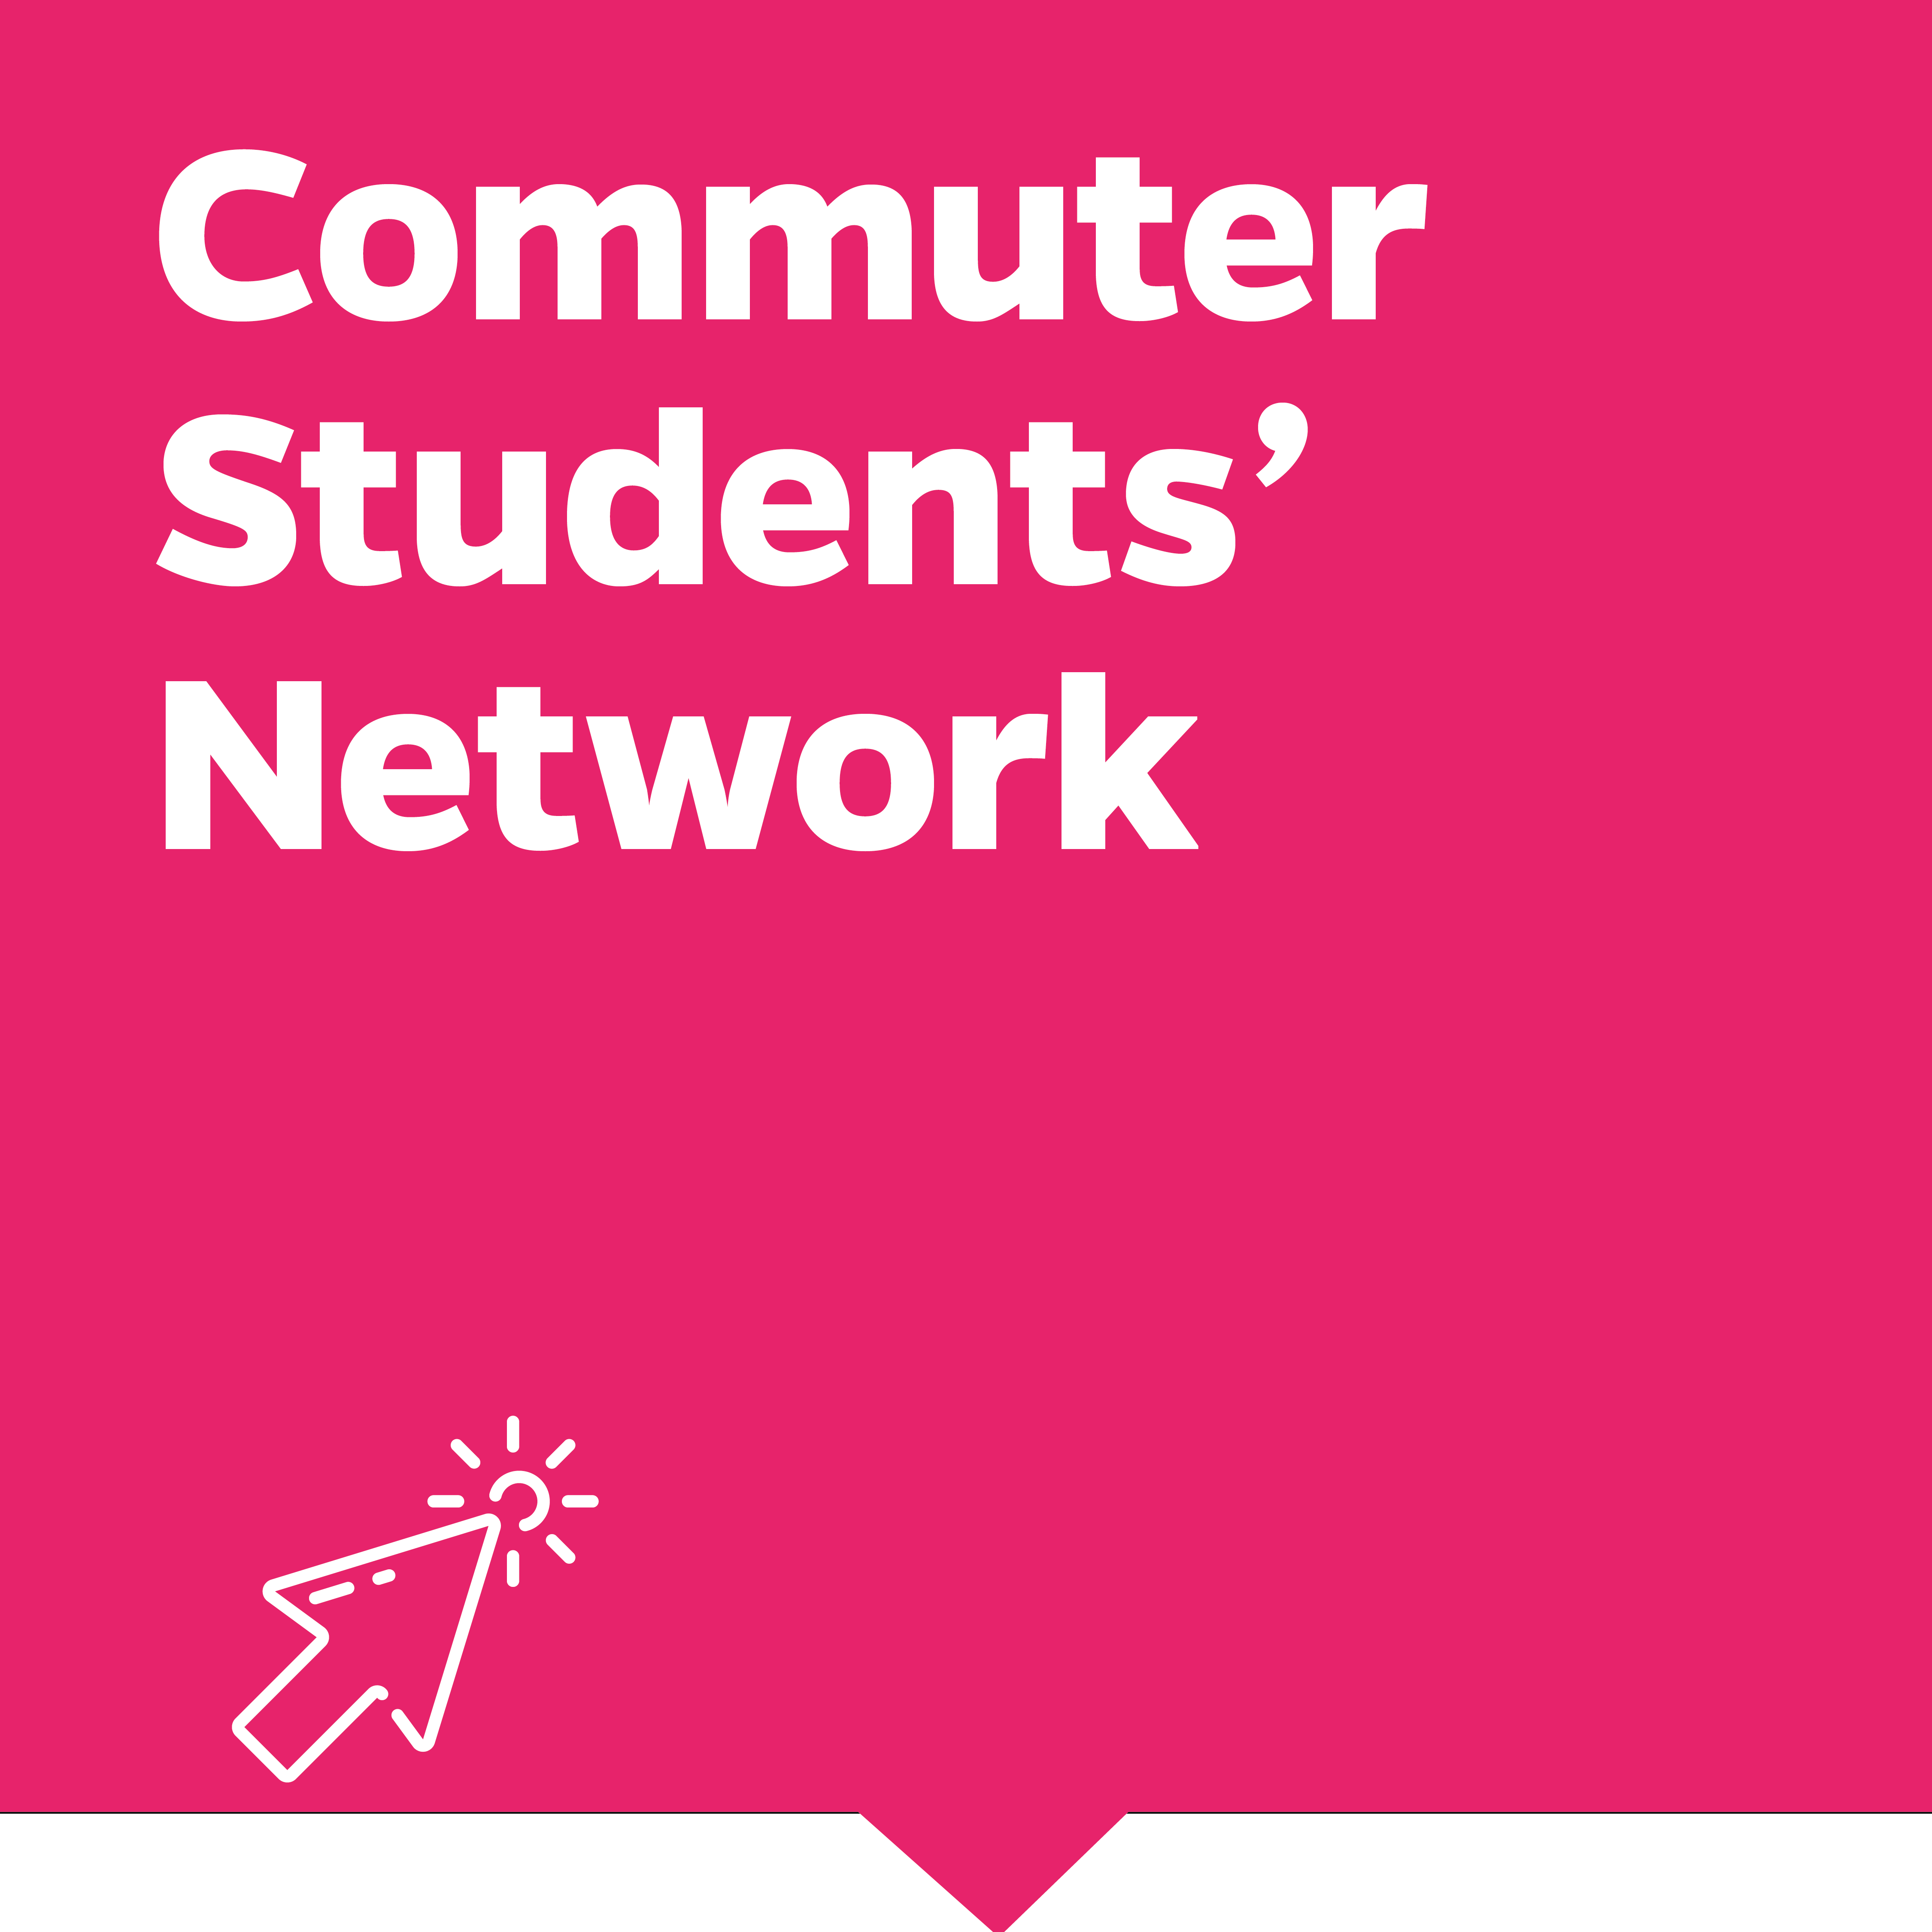 Commuter Students' Network